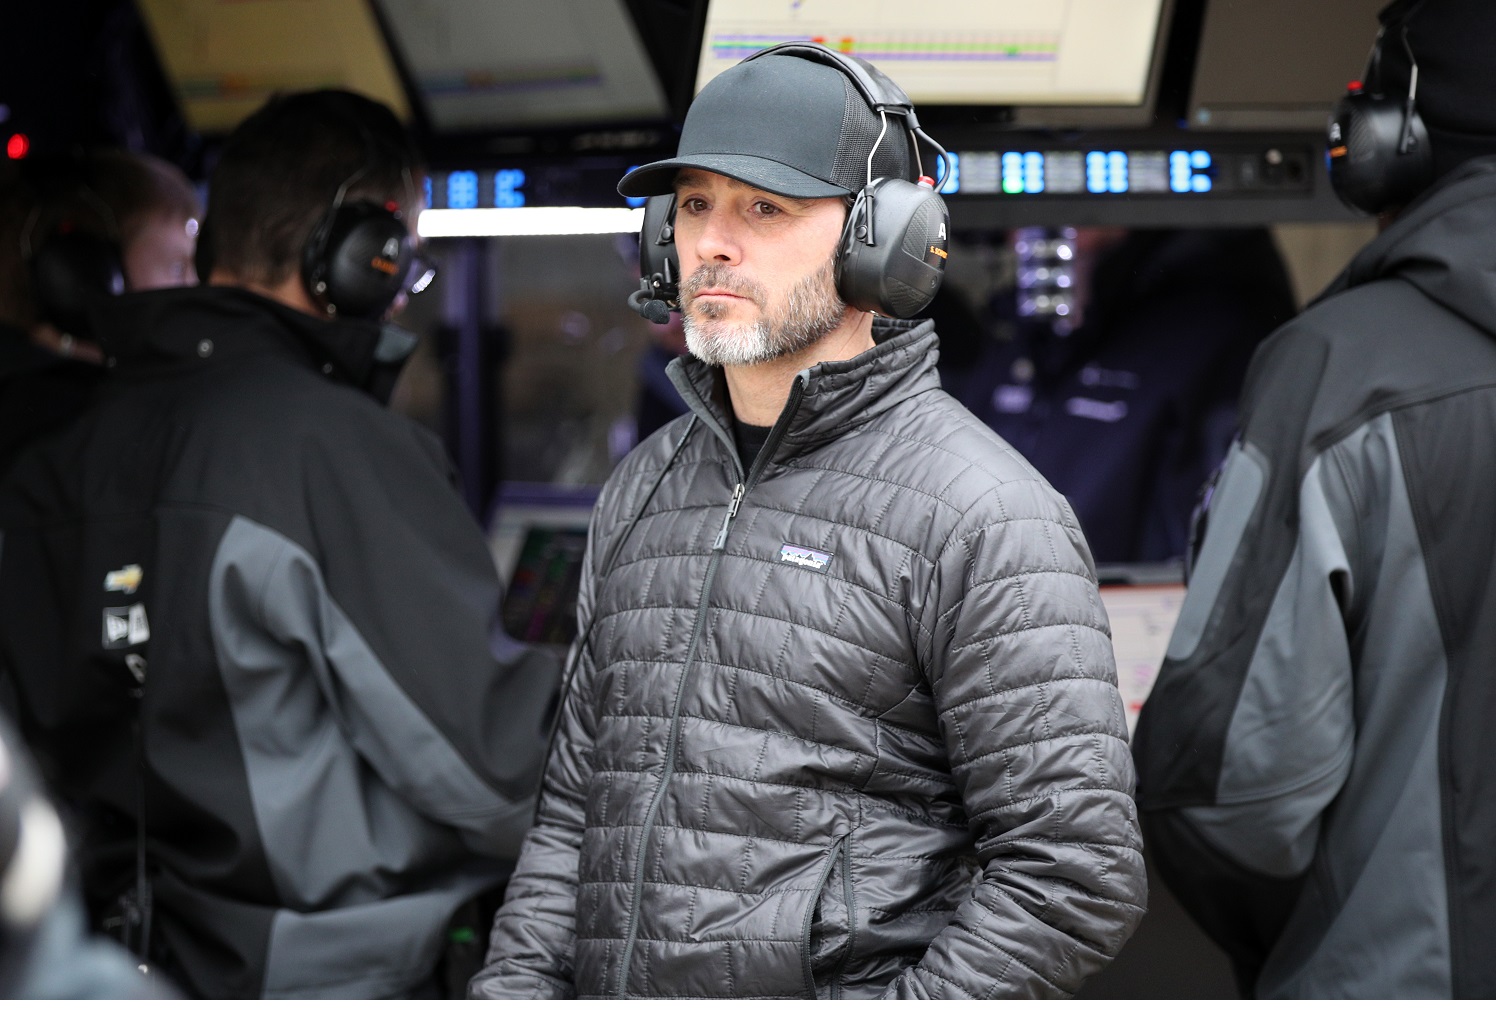 Jimmie Johnson is making his IndyCar debut APril 18, 2021, for Chip Ganassi Racing.